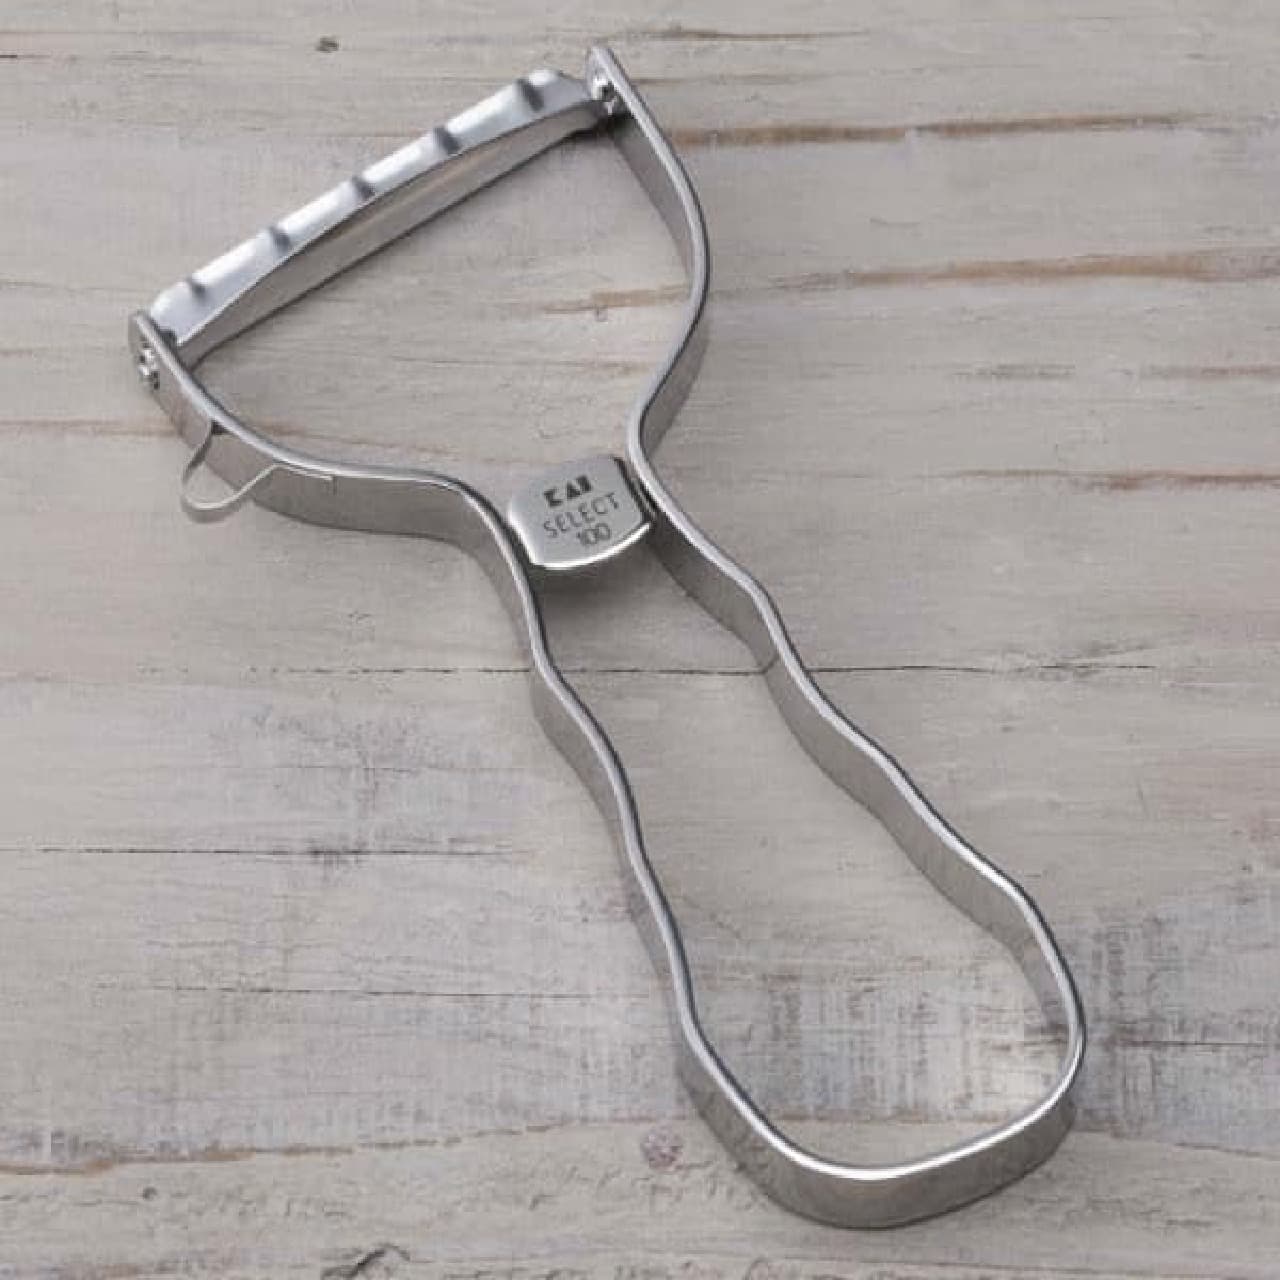 Kai-mark T-shaped peeler that fits in your hand with its asymmetrical shape